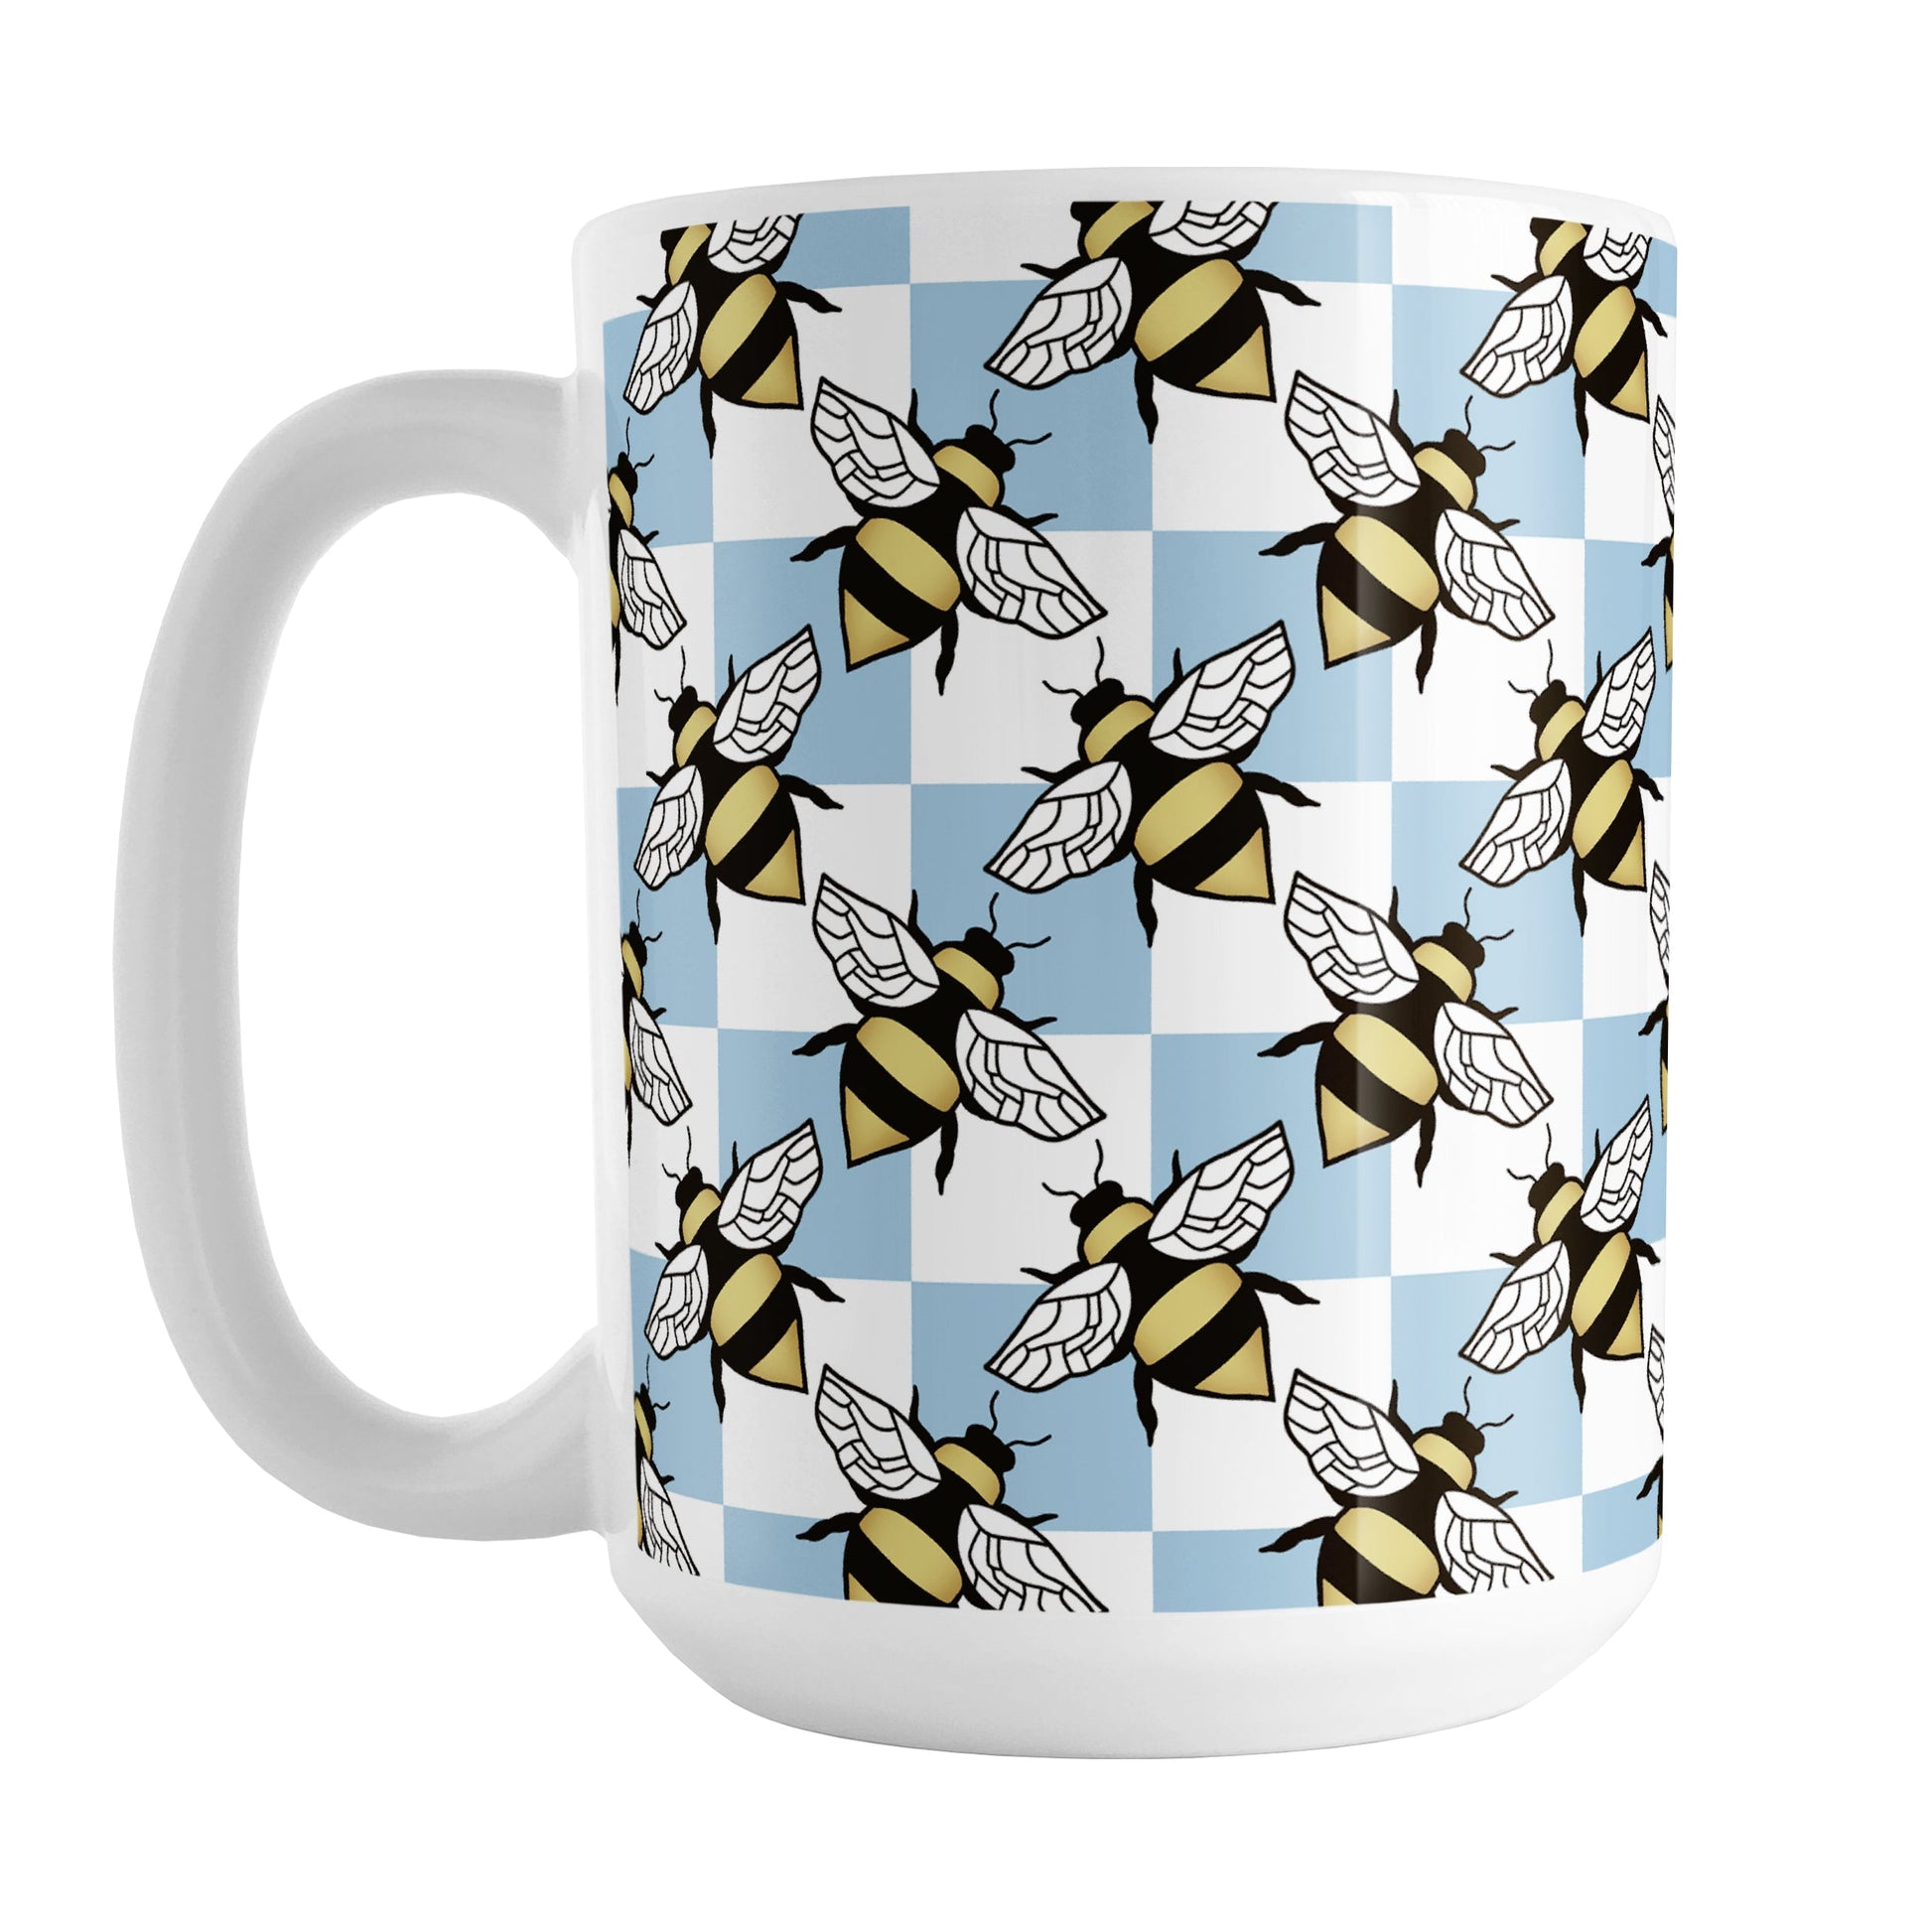 Blue Checkered Bee Mug (15oz) at Amy's Coffee Mugs. A ceramic coffee mug designed with a blue and white checkered pattern adorned with alternately facing bees over the check pattern. This design wraps around the mug up to the handle.